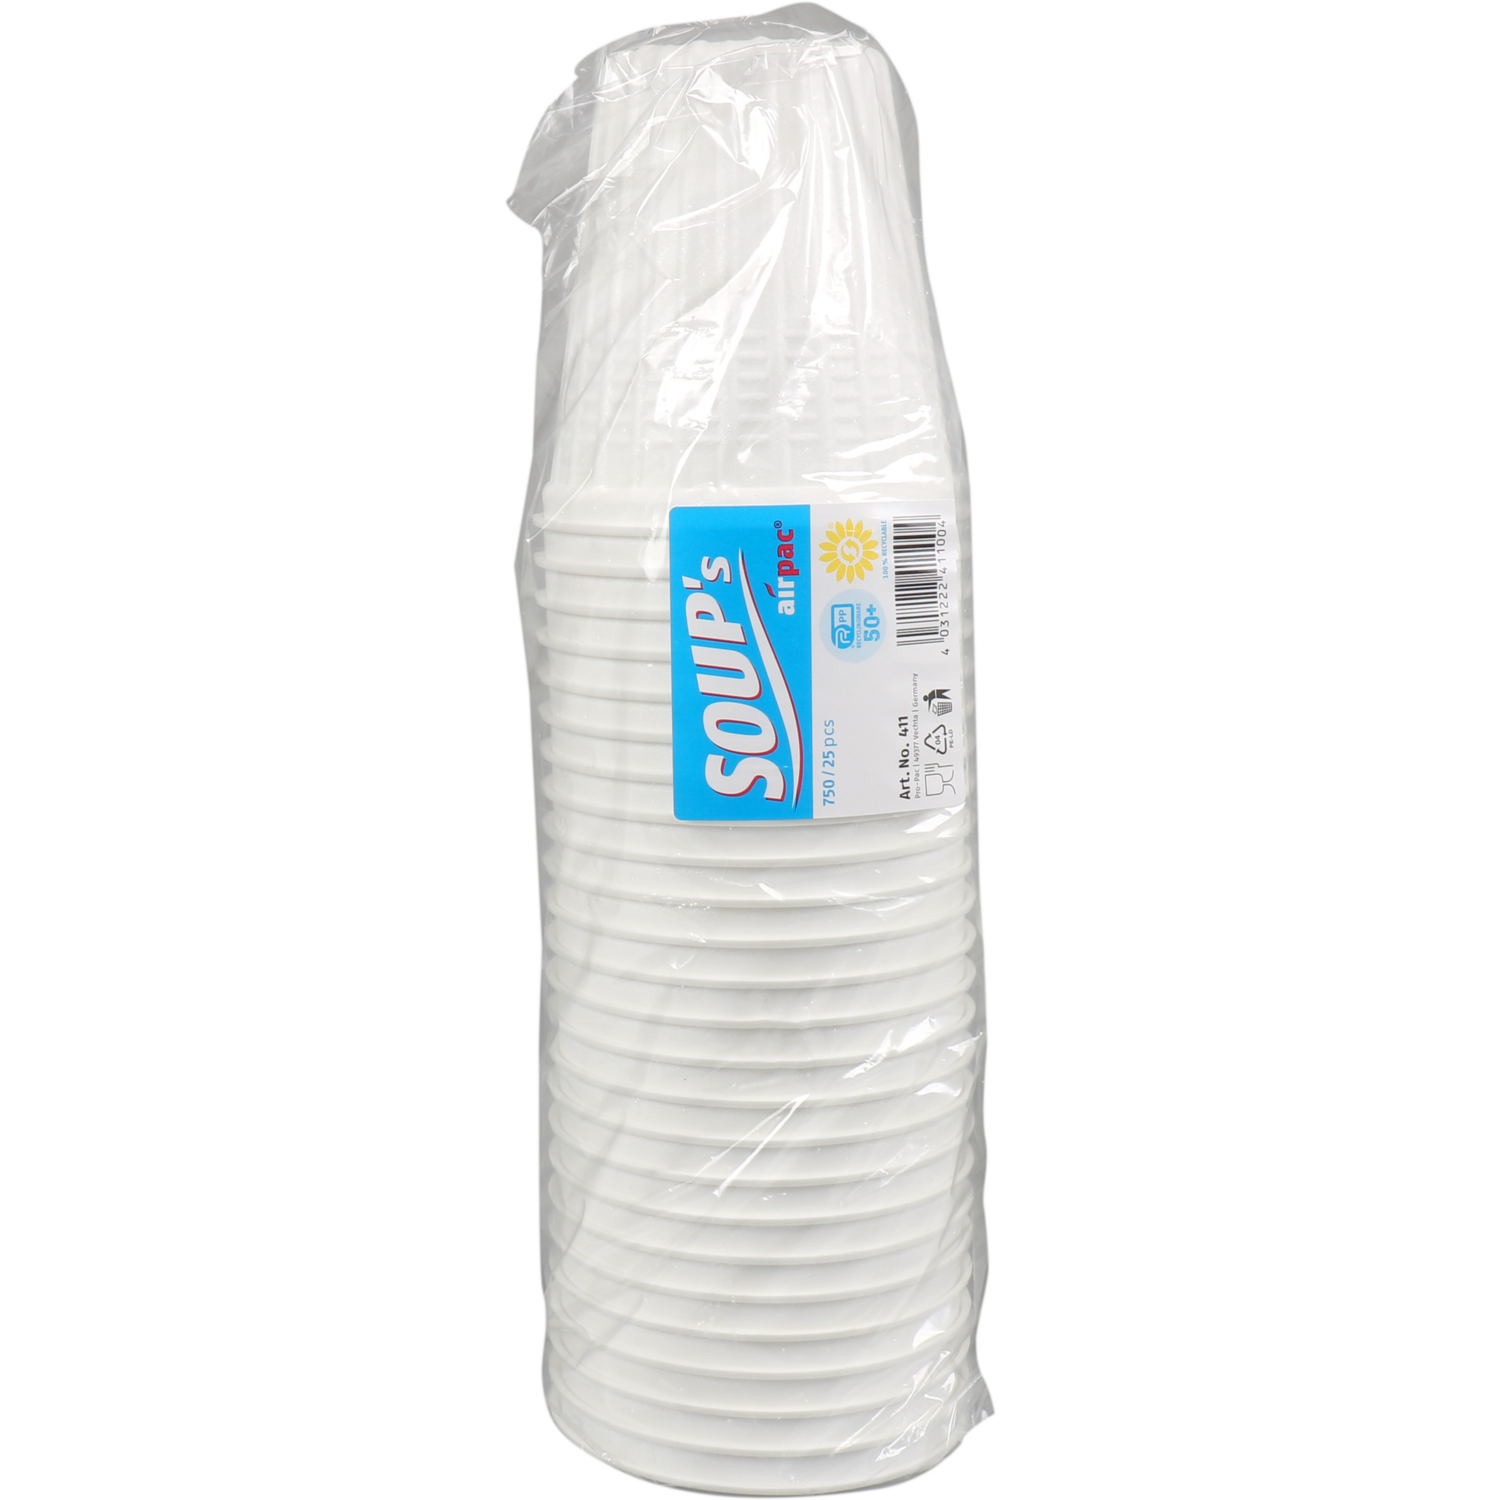  Soepbeker, PP-thermo, 750ml, wit 2